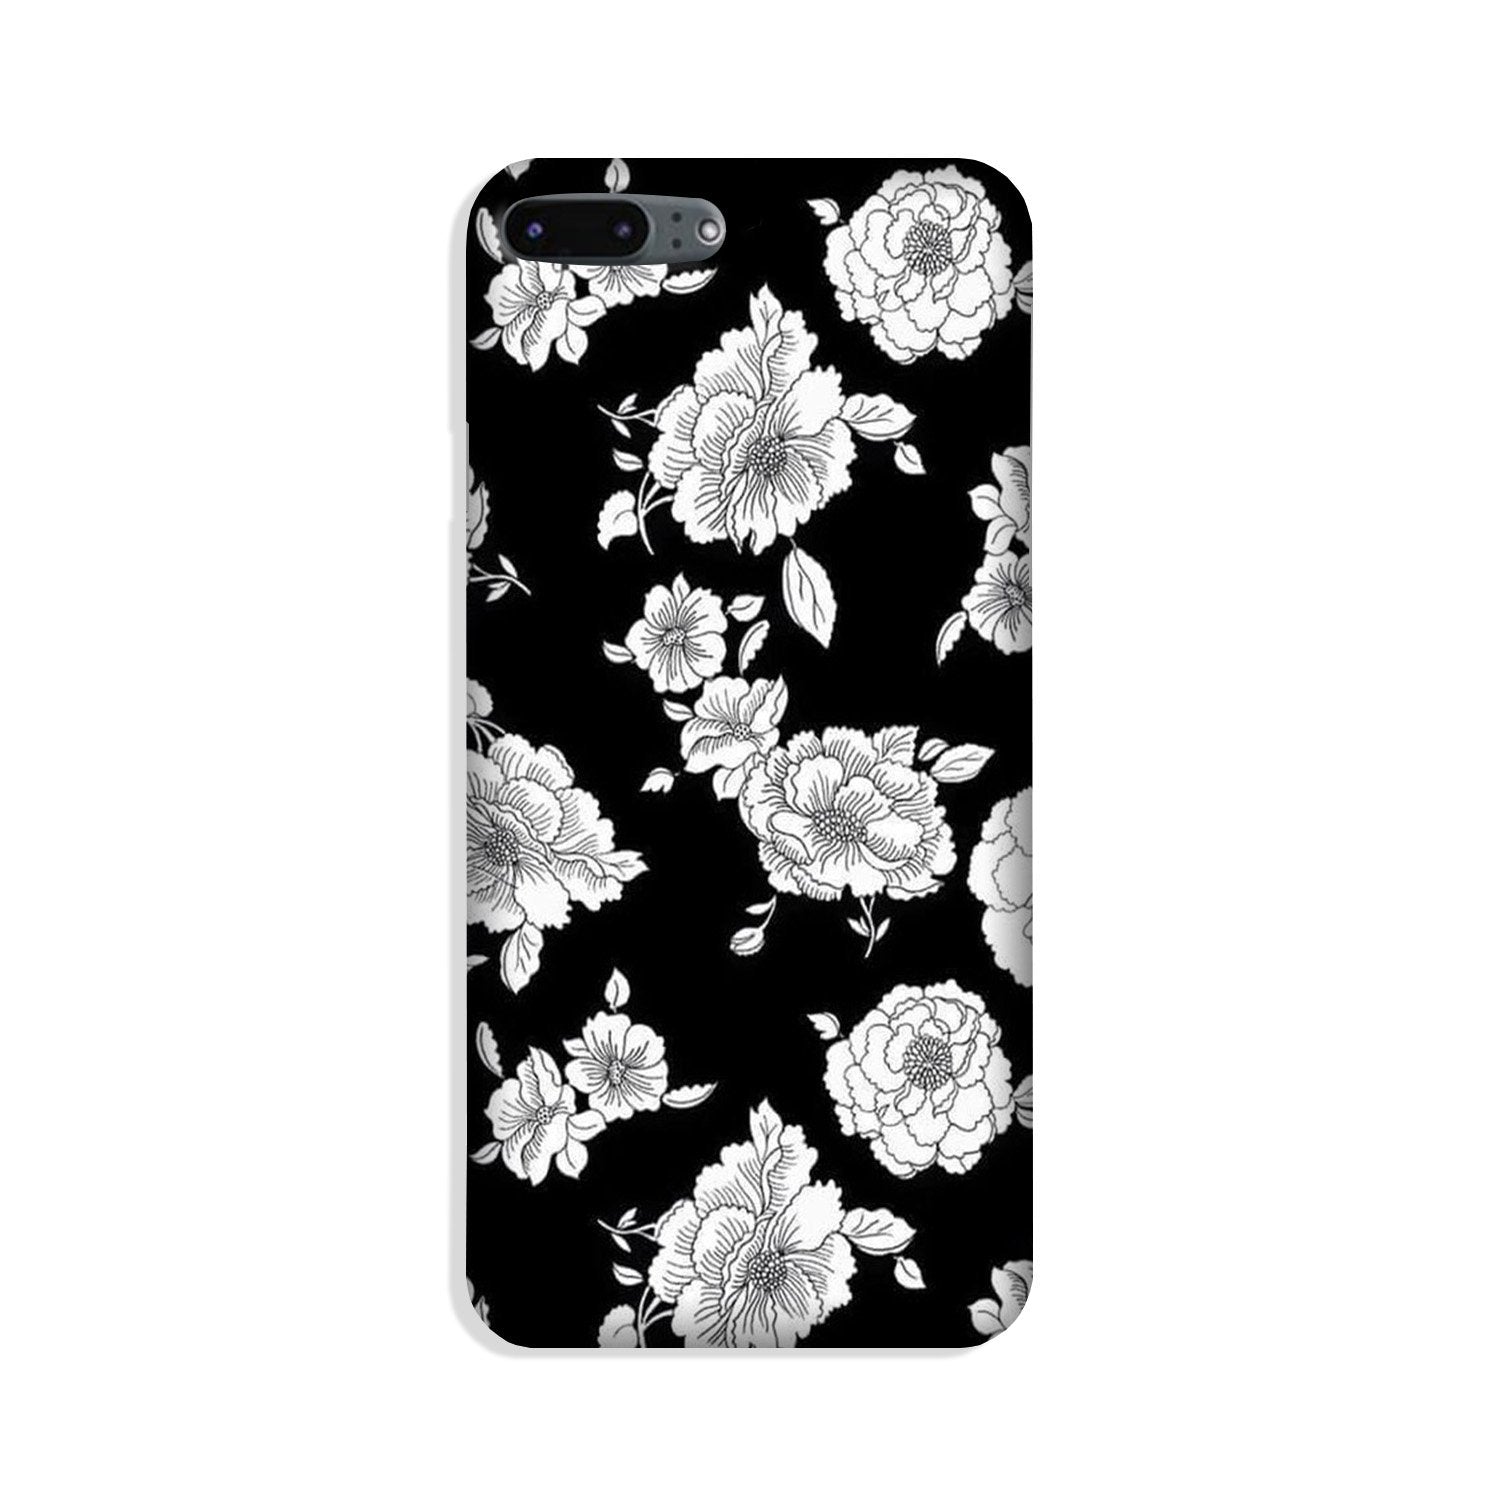 White flowers Black Background Case for iPhone 8 Plus